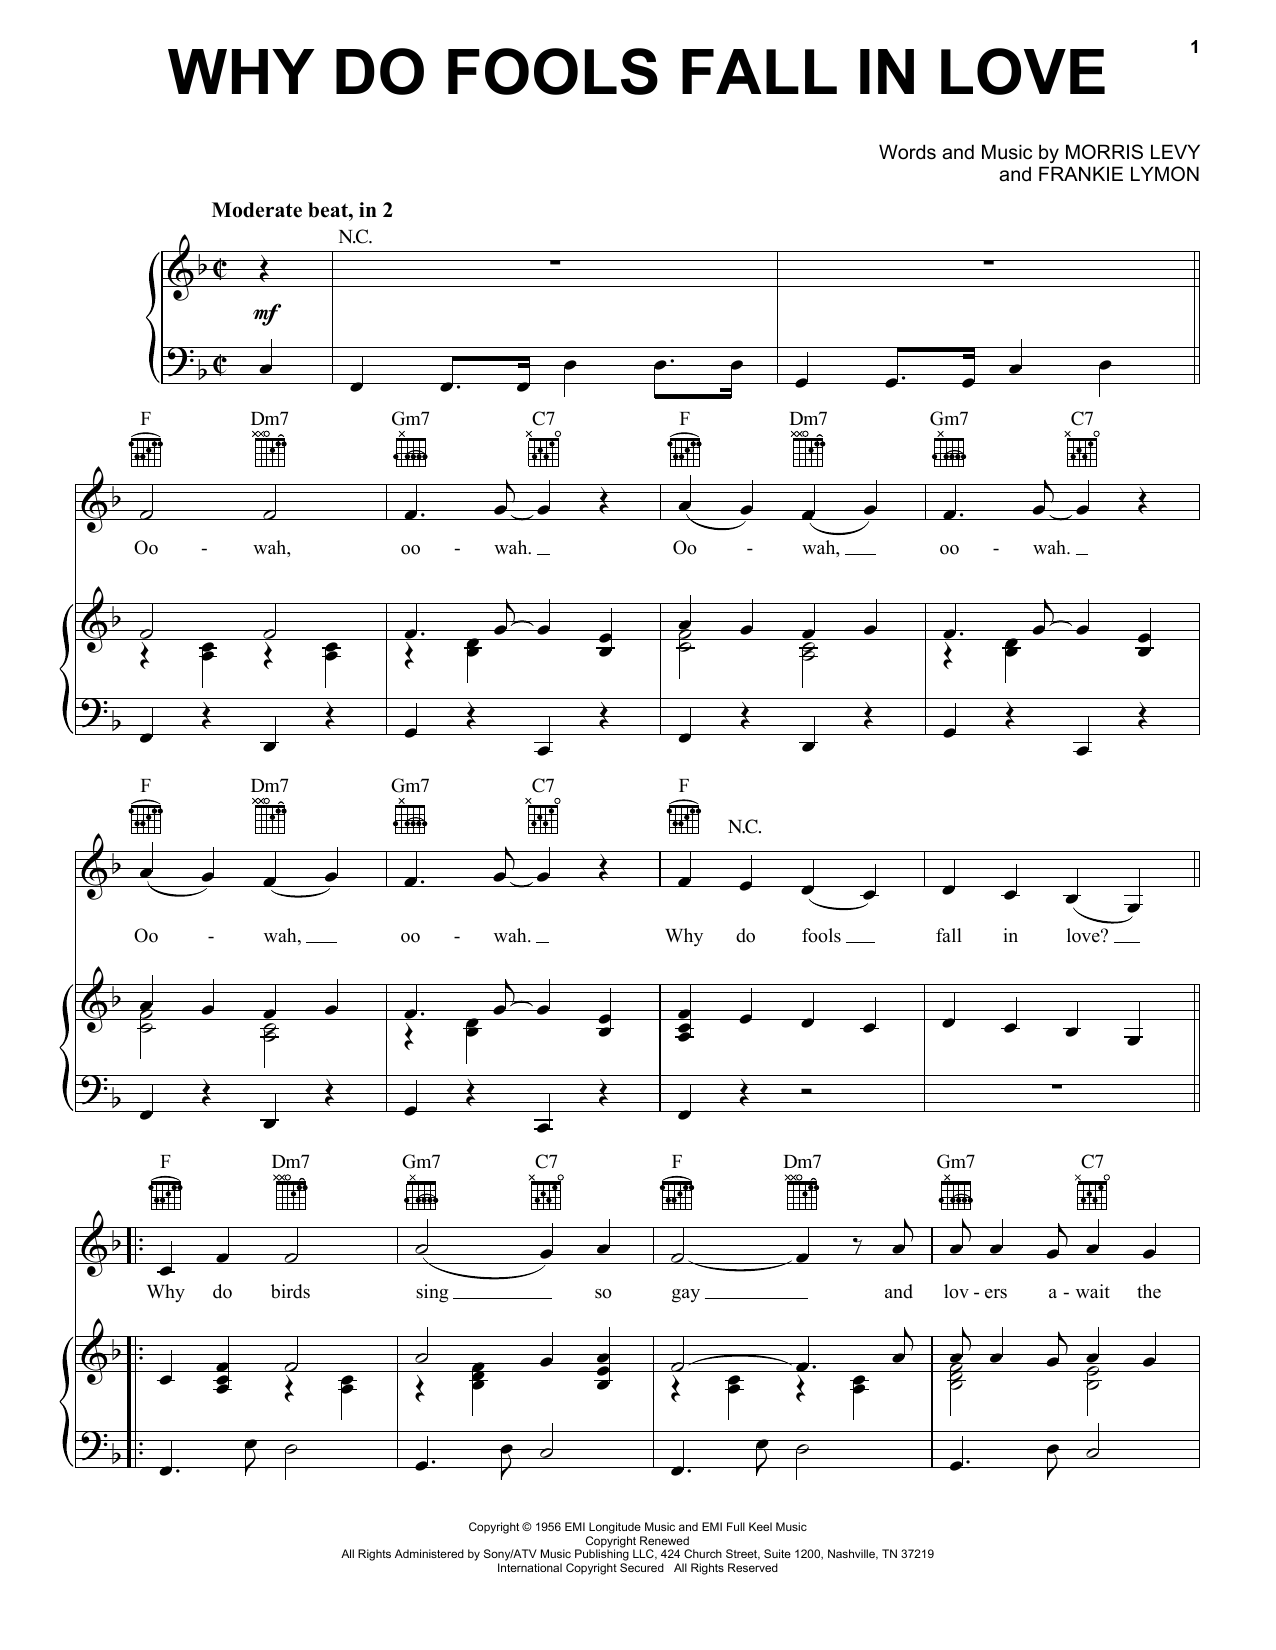 Why Do Fools Fall In Love sheet music